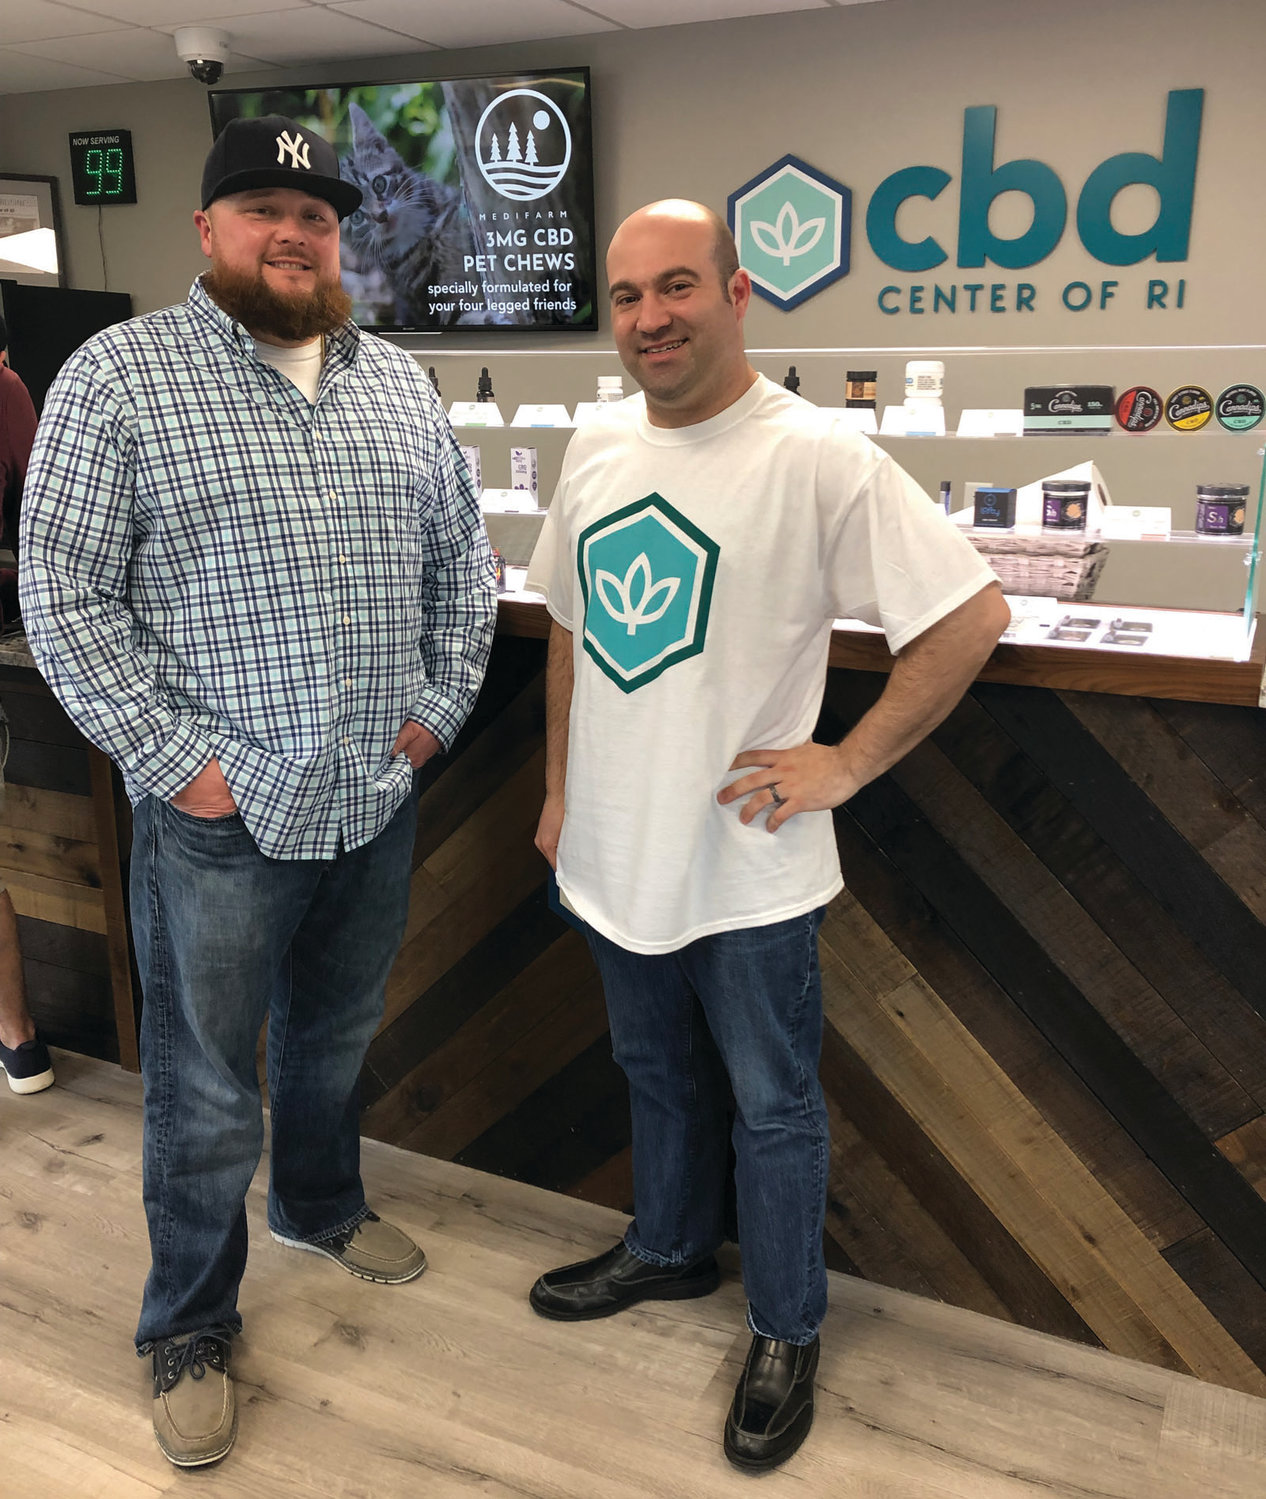 LOOKING TO HELP: Chris Morgan and Matt Resnick are the founders of the CBD Center of RI, and both men said they are looking to eliminate stigmas surrounding the product and bring relief to the community.